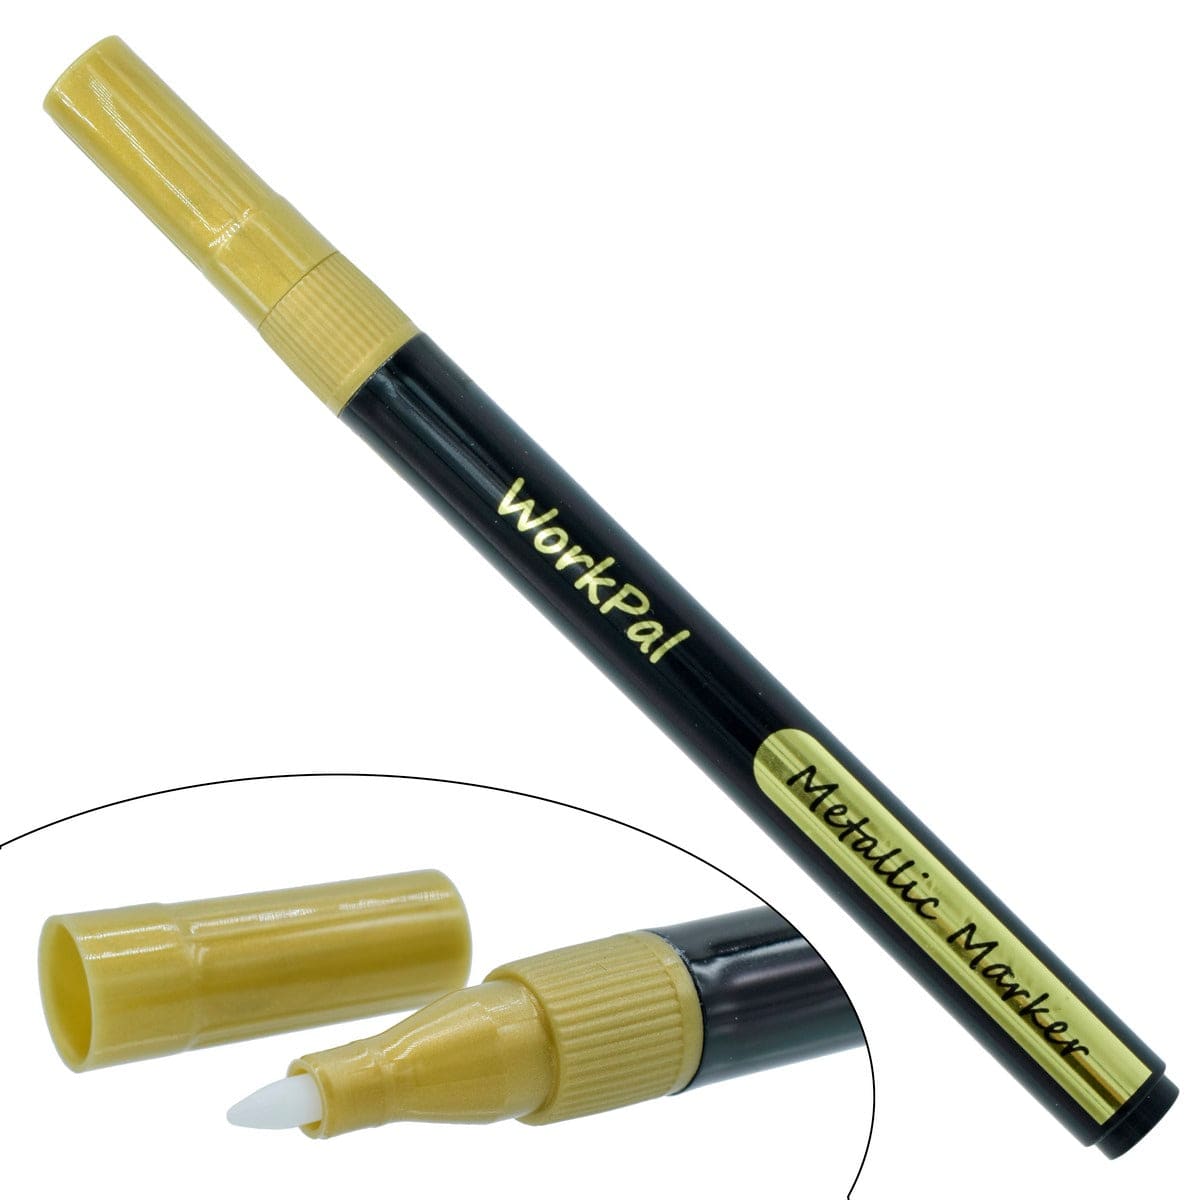 jags-mumbai Marker Metallic Marker Pen Gold Workpal | Add Some Shine to Your Art and Craft Projects D-4236GD